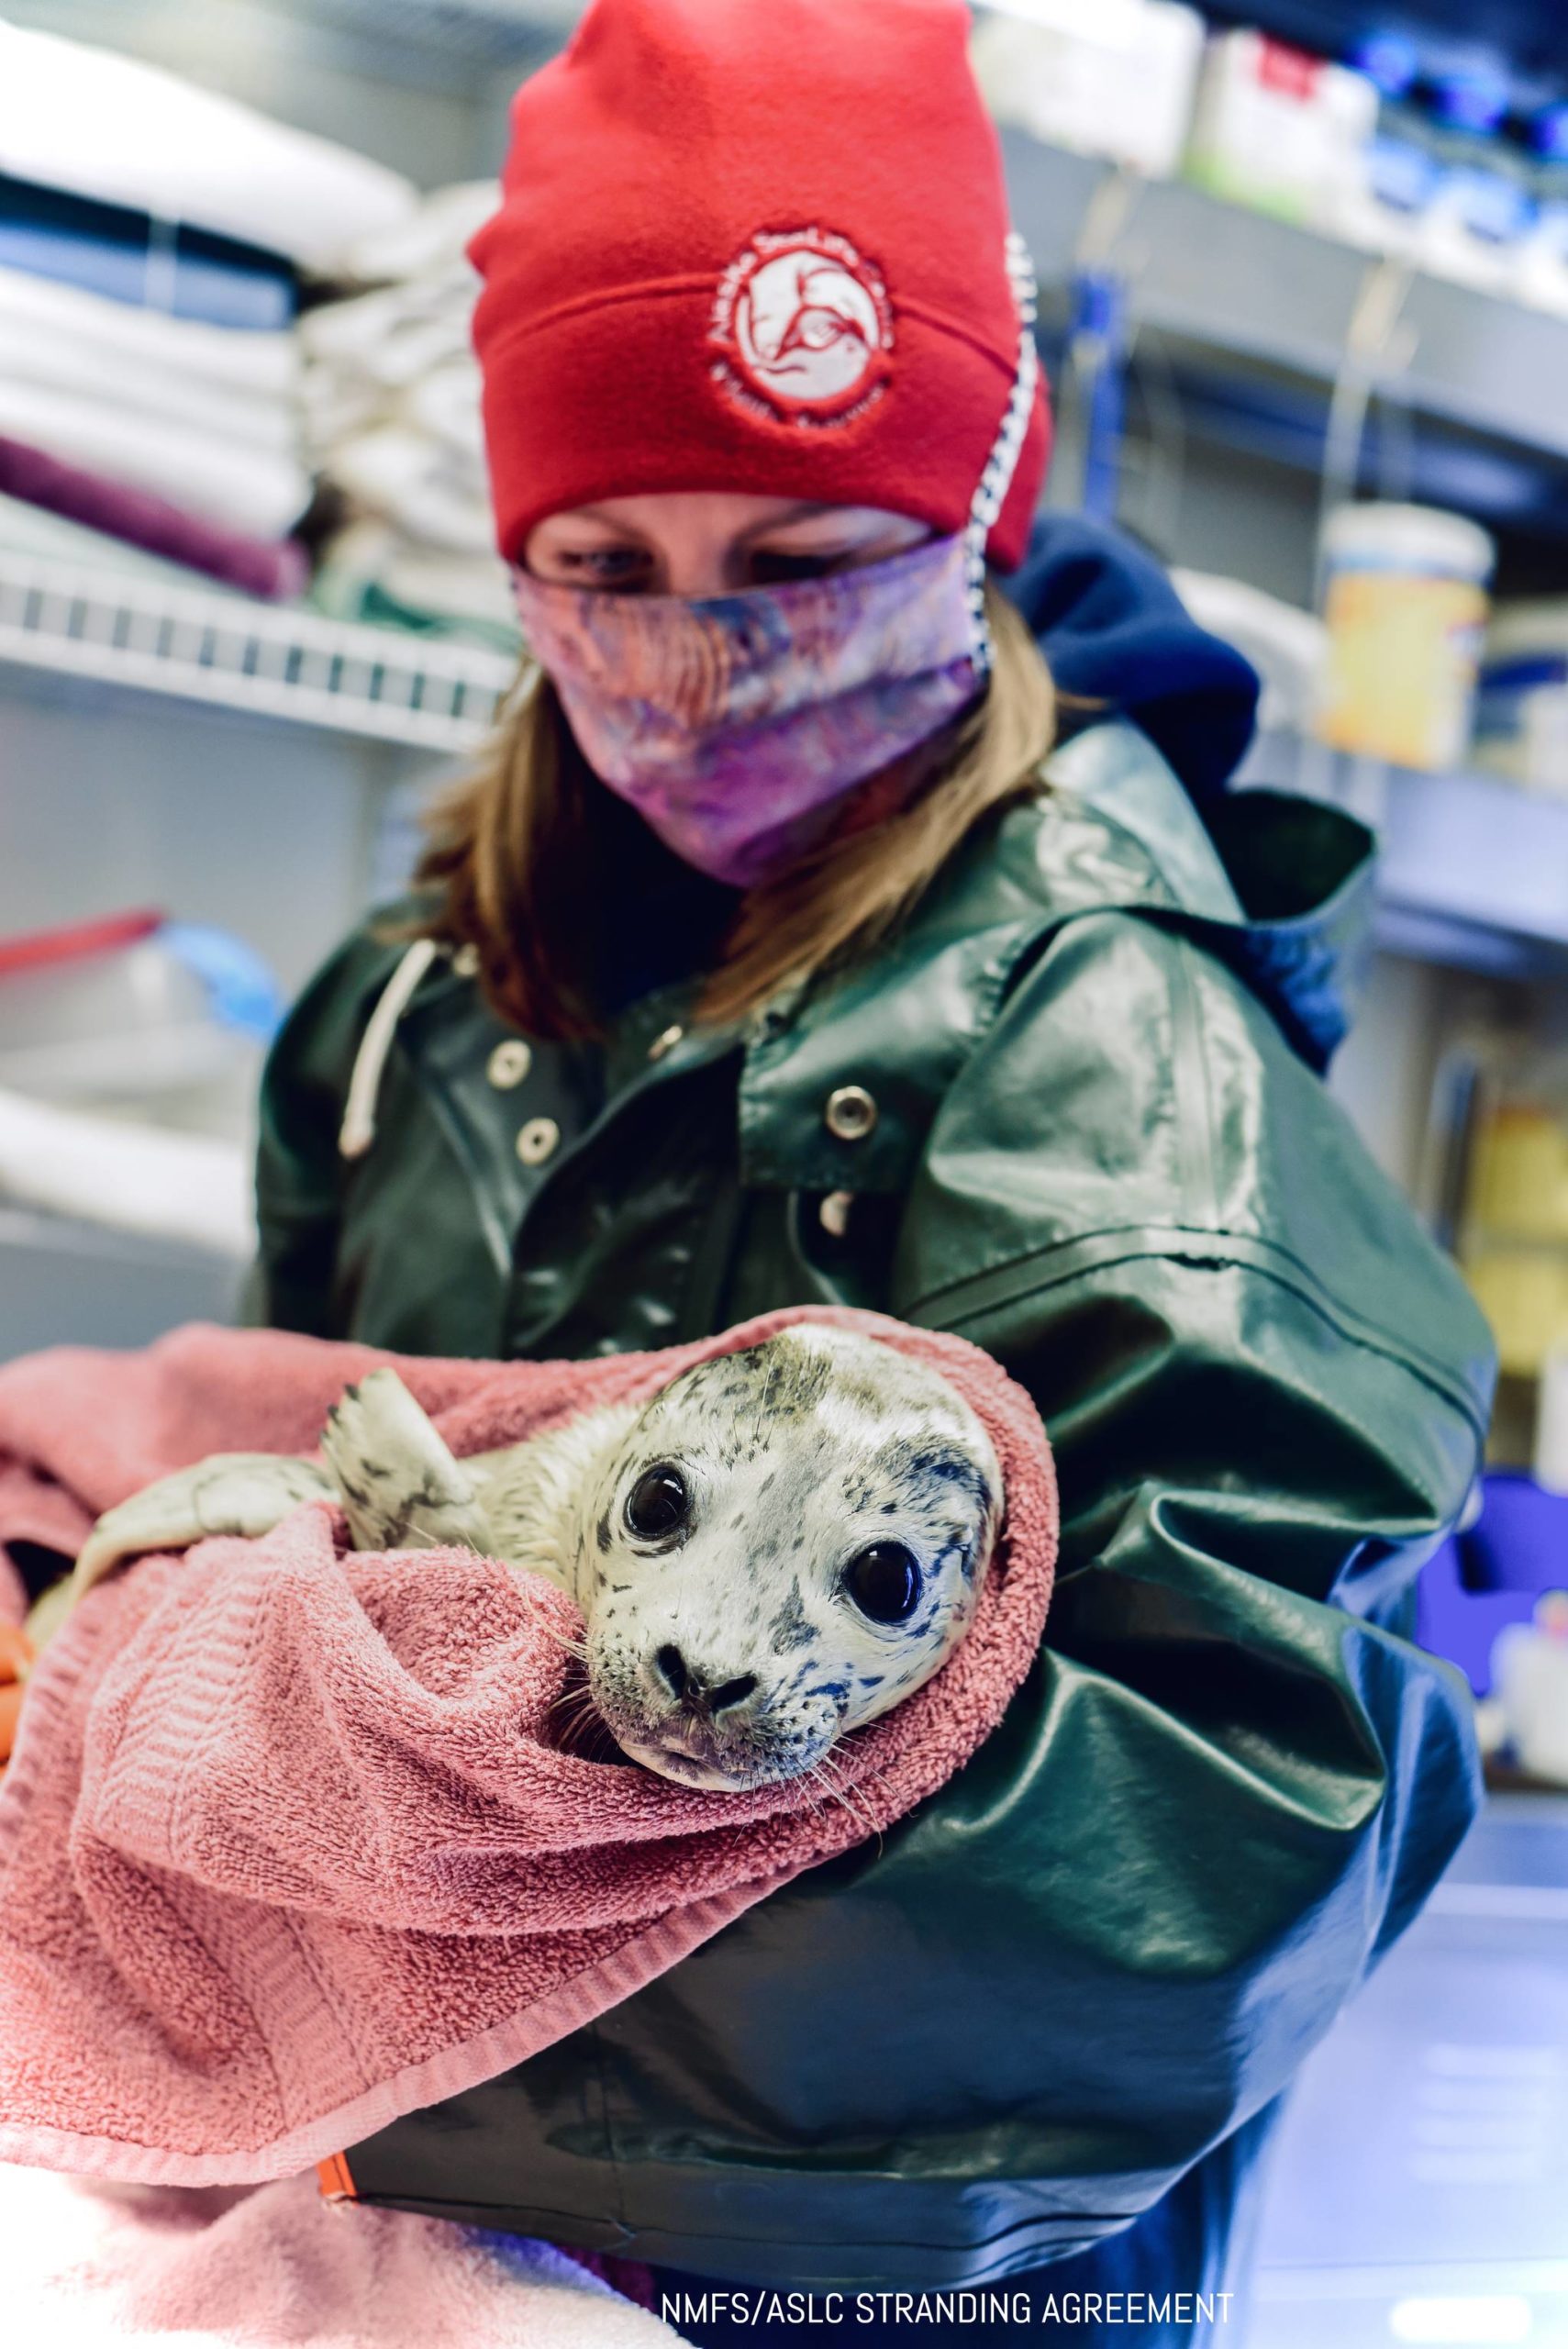 A female harbor seal pup that was admitted to the Alaska SeaLife Center’s Wildlife Response Program on May 4 is seen here in this undated photo. (Photo courtesy Alaska SeaLife Center)